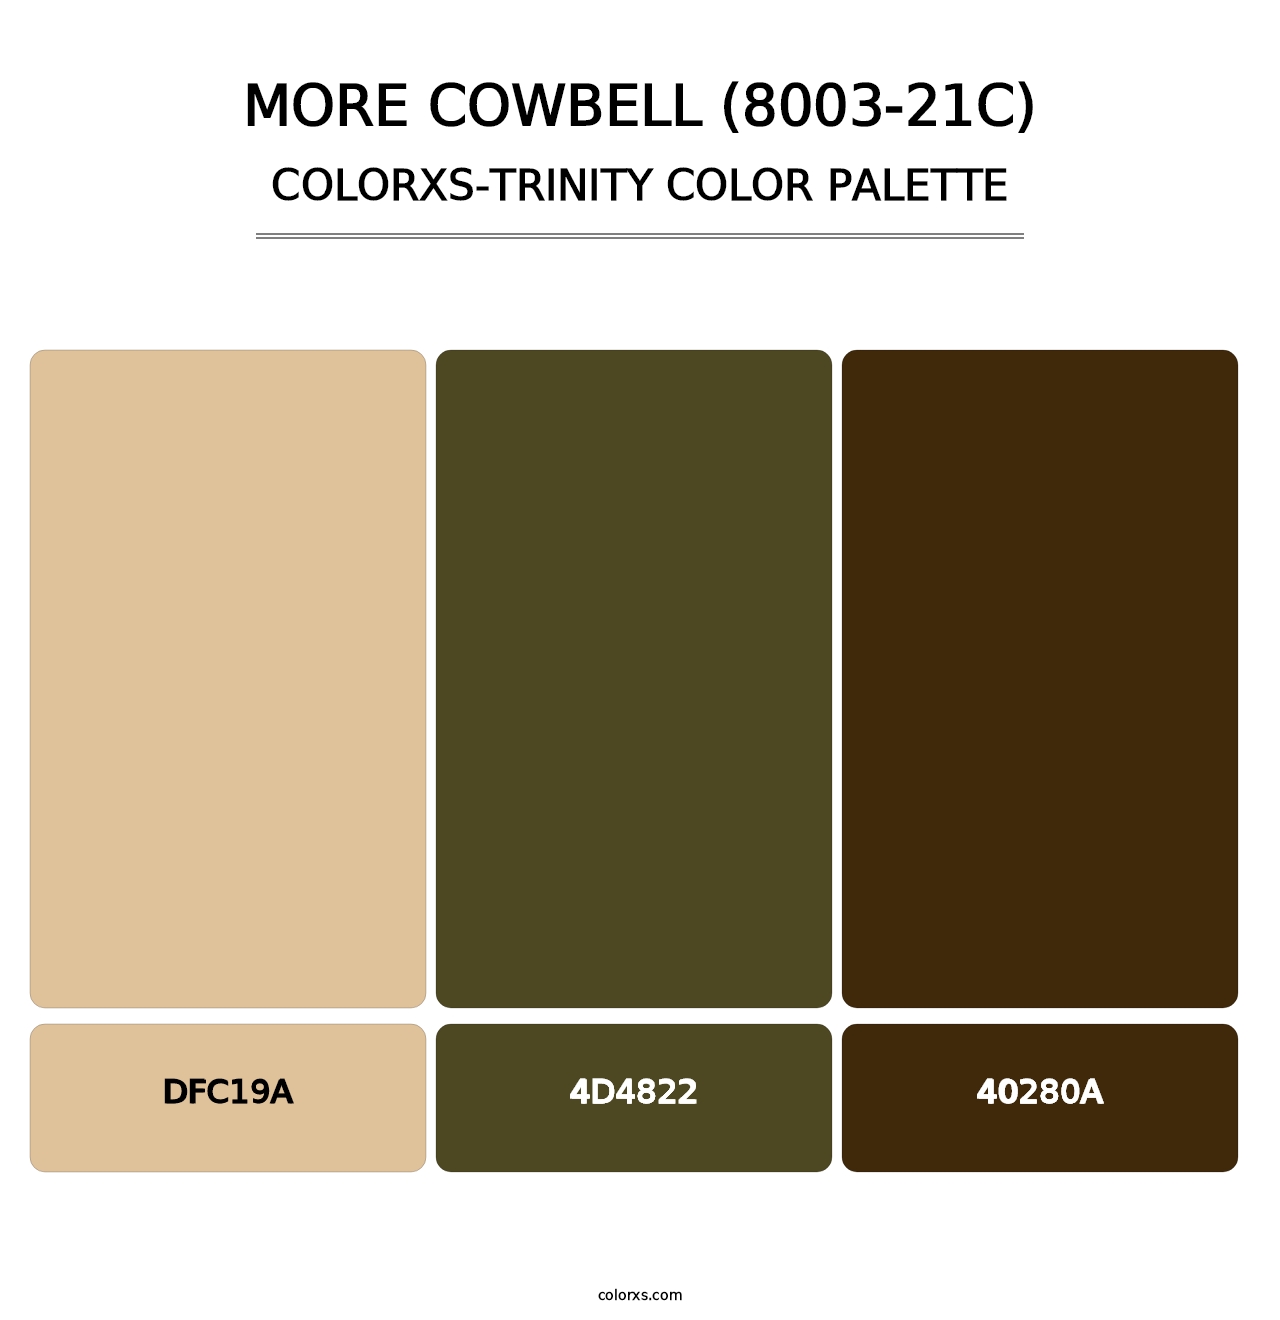 More Cowbell (8003-21C) - Colorxs Trinity Palette